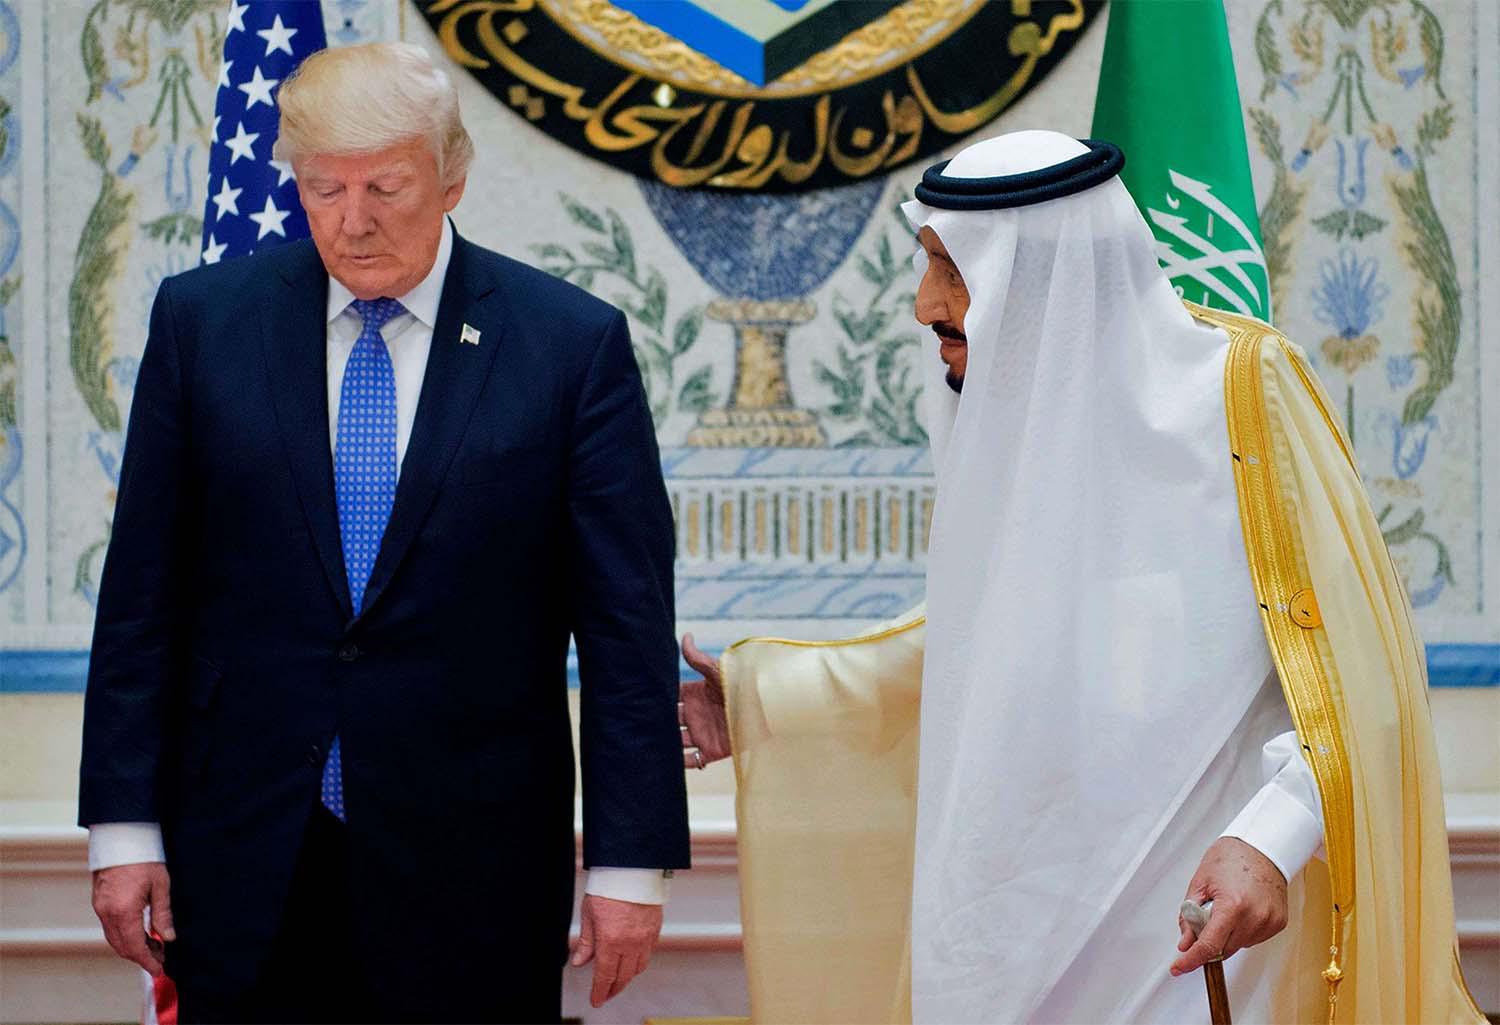 The two leaders also discussed the strategic bilateral relations between Saudi Arabia and the US